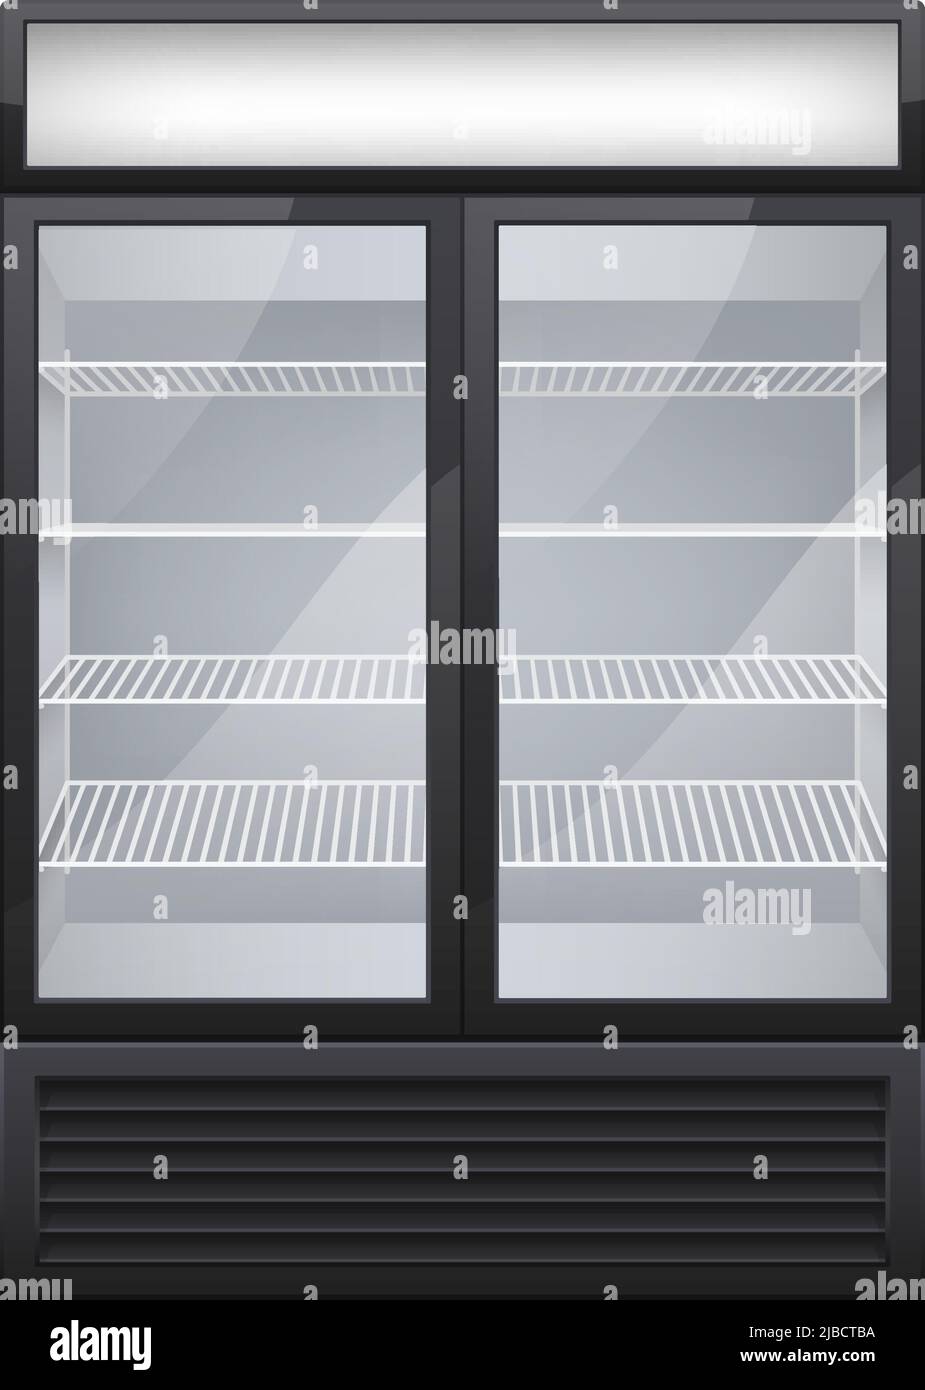 Commercial glass door drink fridge realistic composition with isolated image of shop fridge with two display doors vector illustration Stock Vector